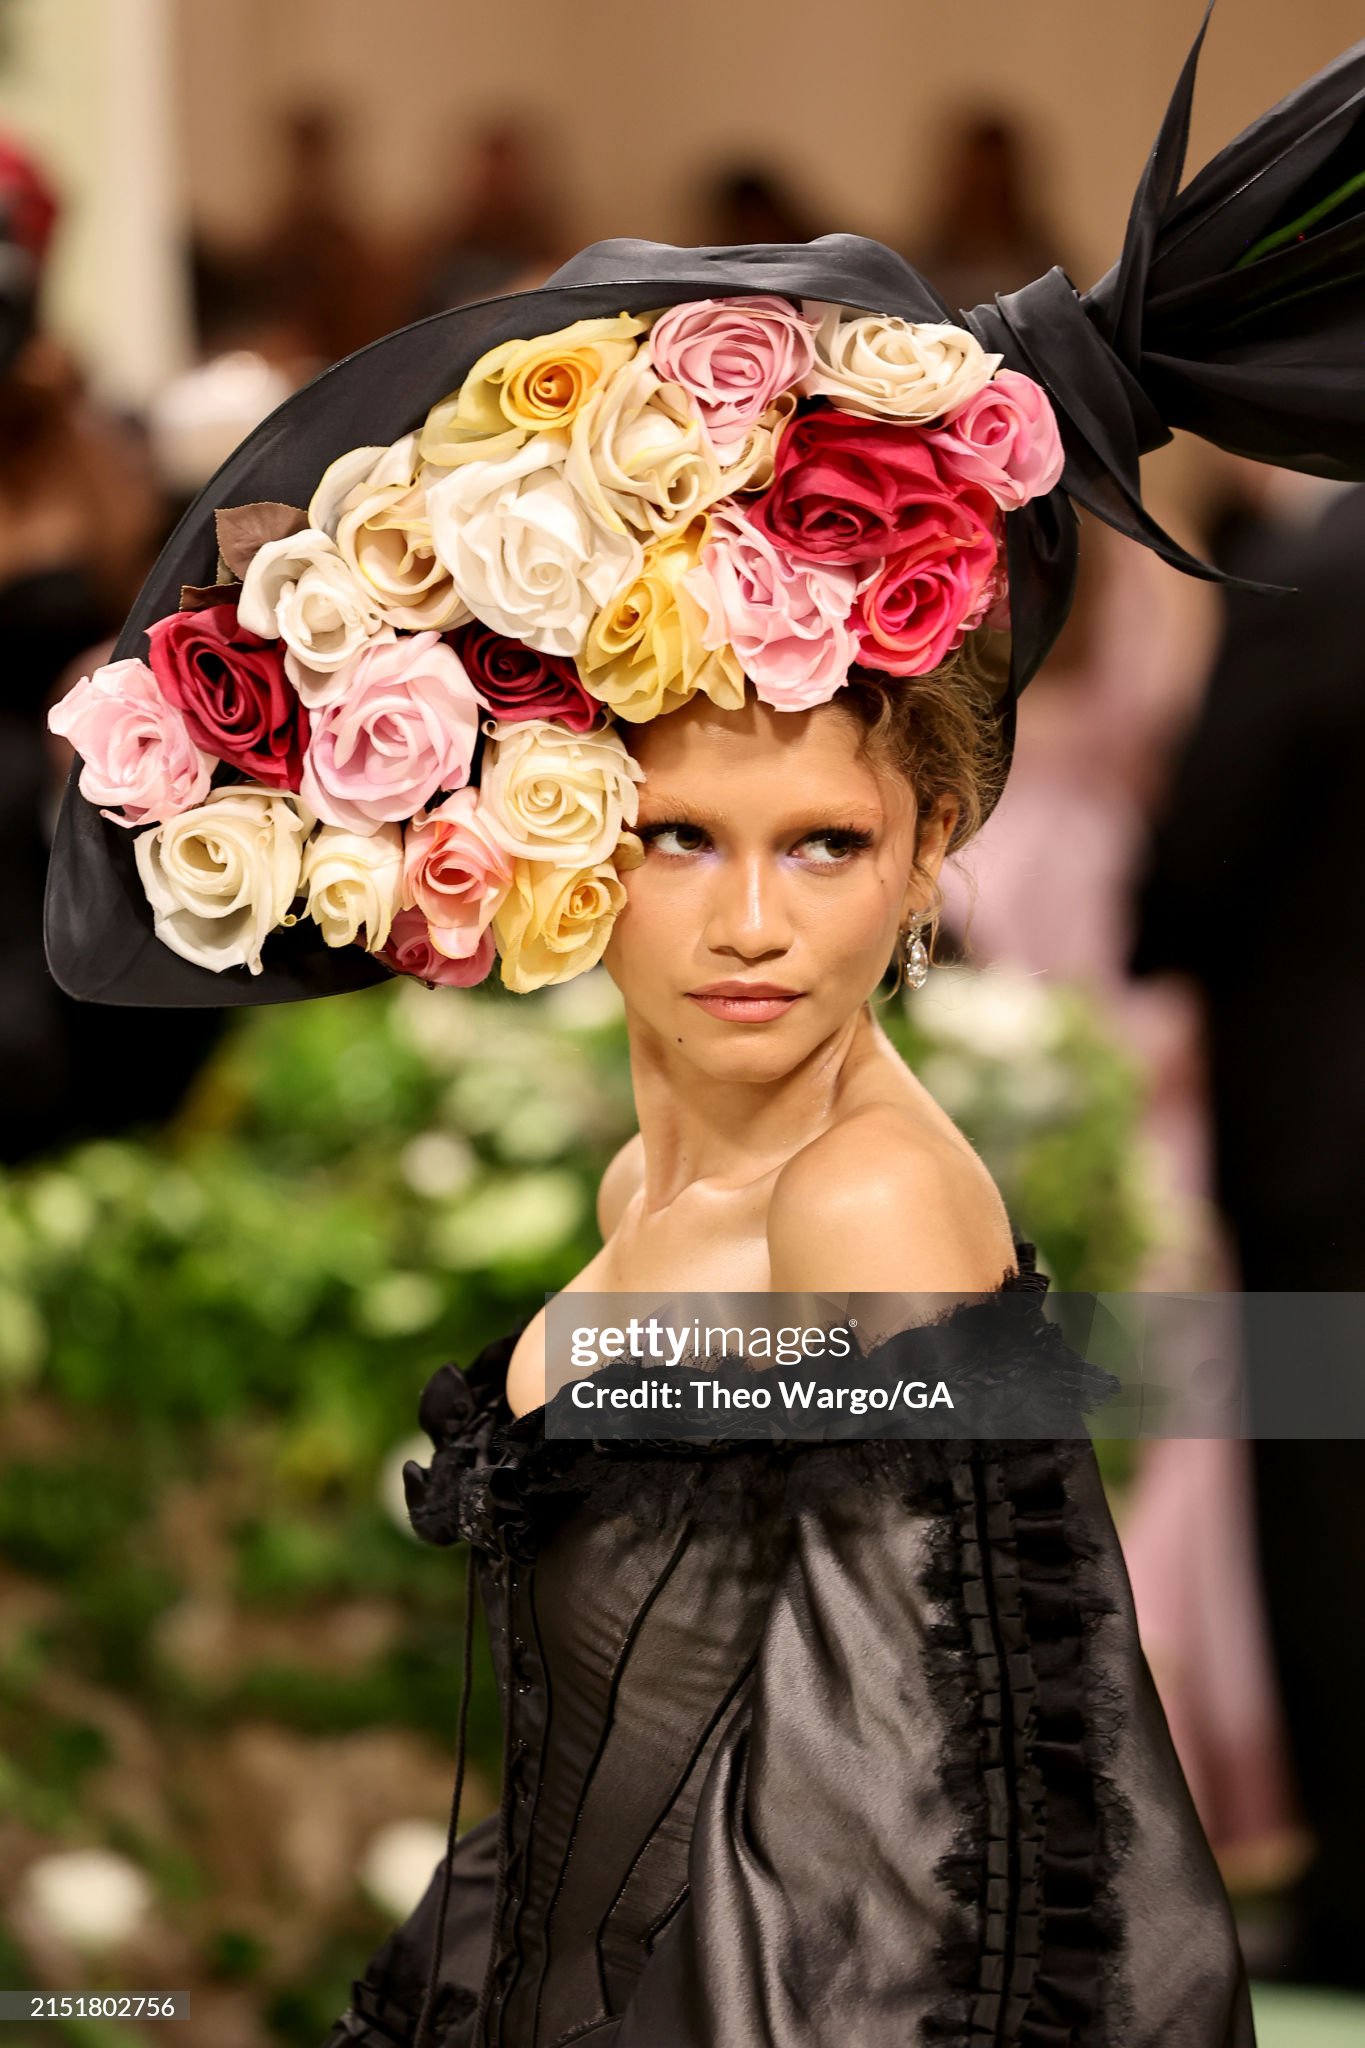 gettyimages-2151802756-2048x2048.jpg